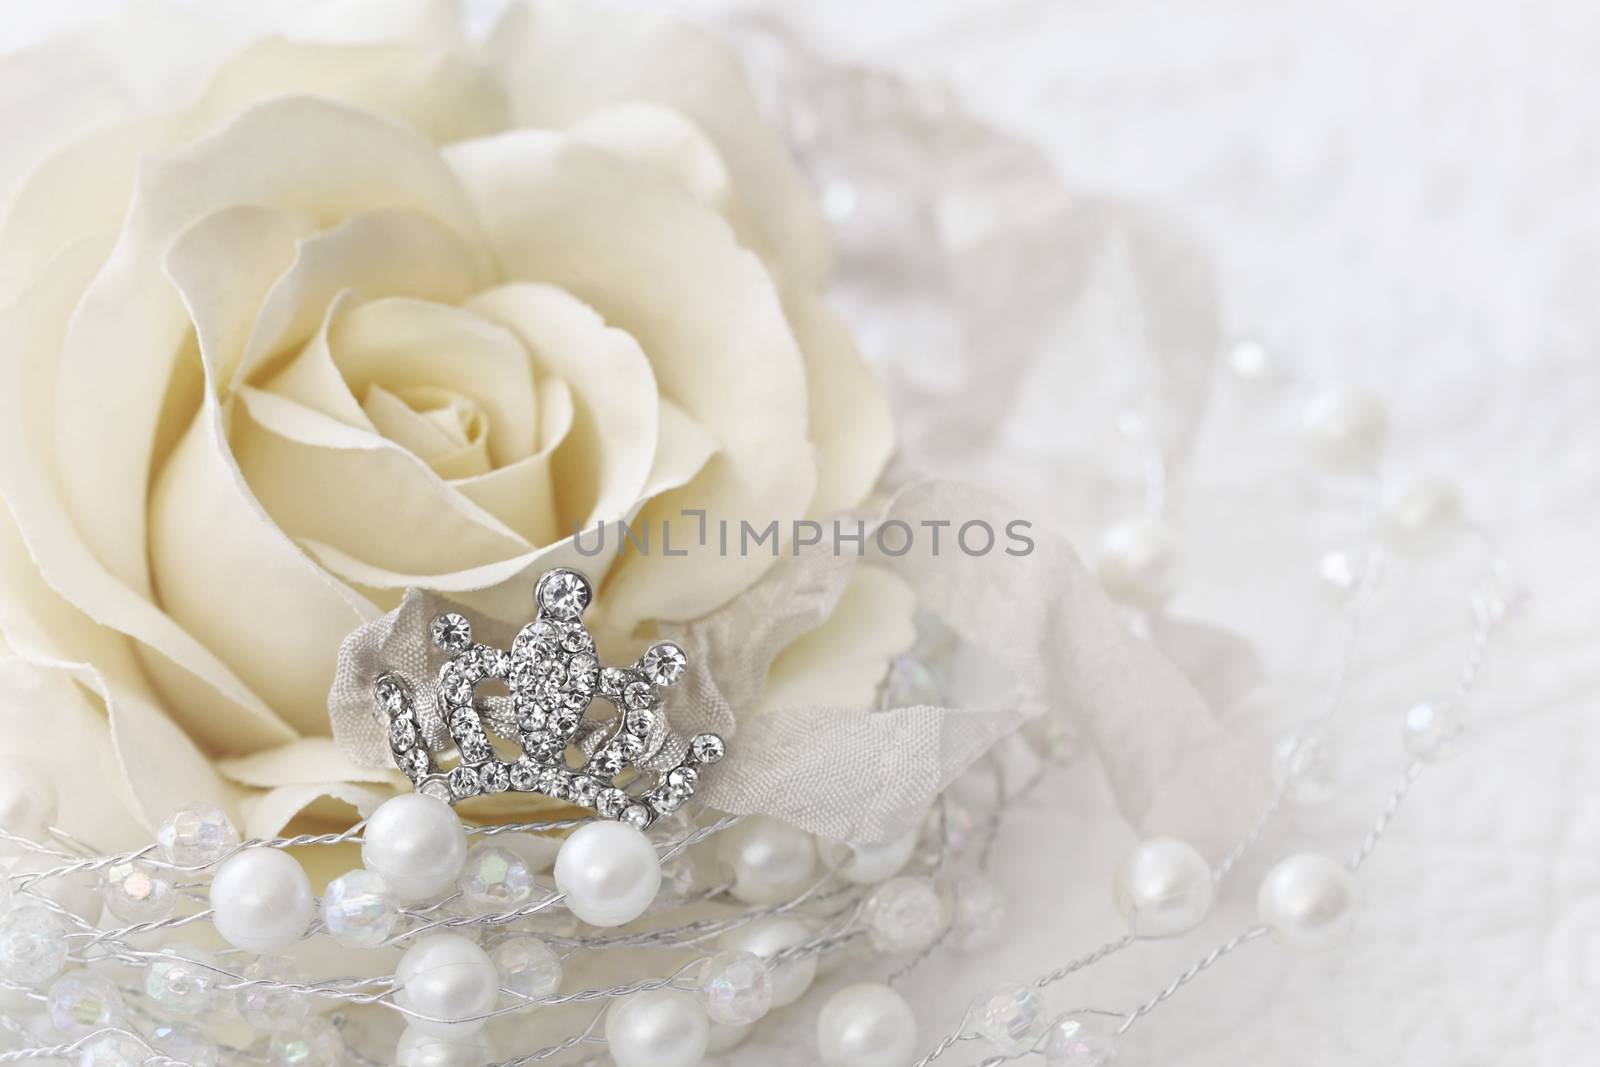 Cream color rose with jeweled crown by Sandralise